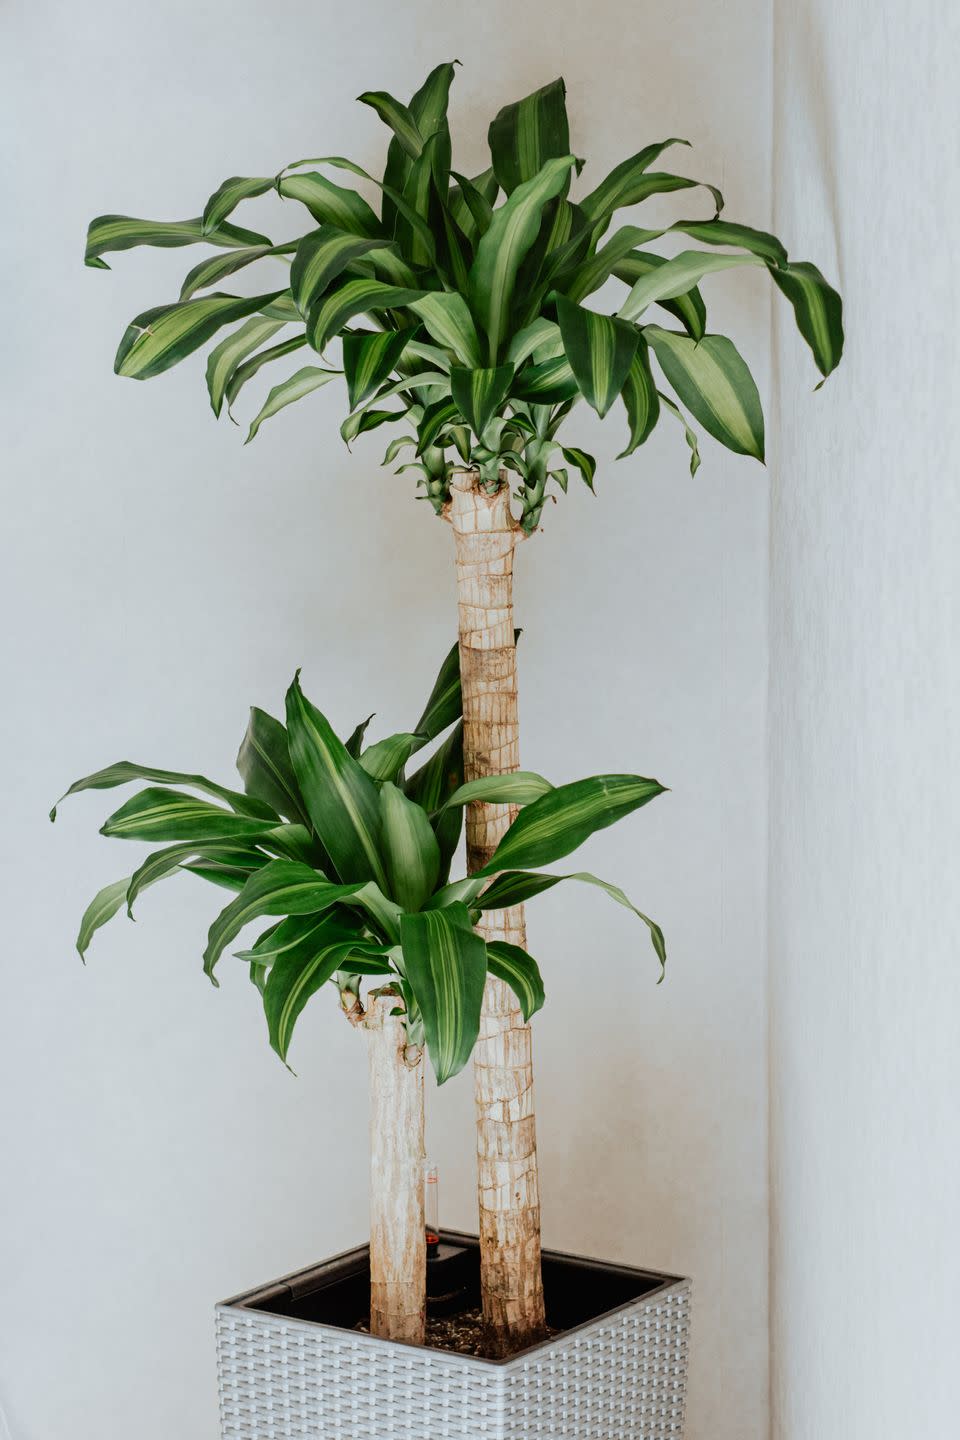 indoor trees, a beautiful shot of dracaena fragrant tree growing in a pot indoor against the white wall